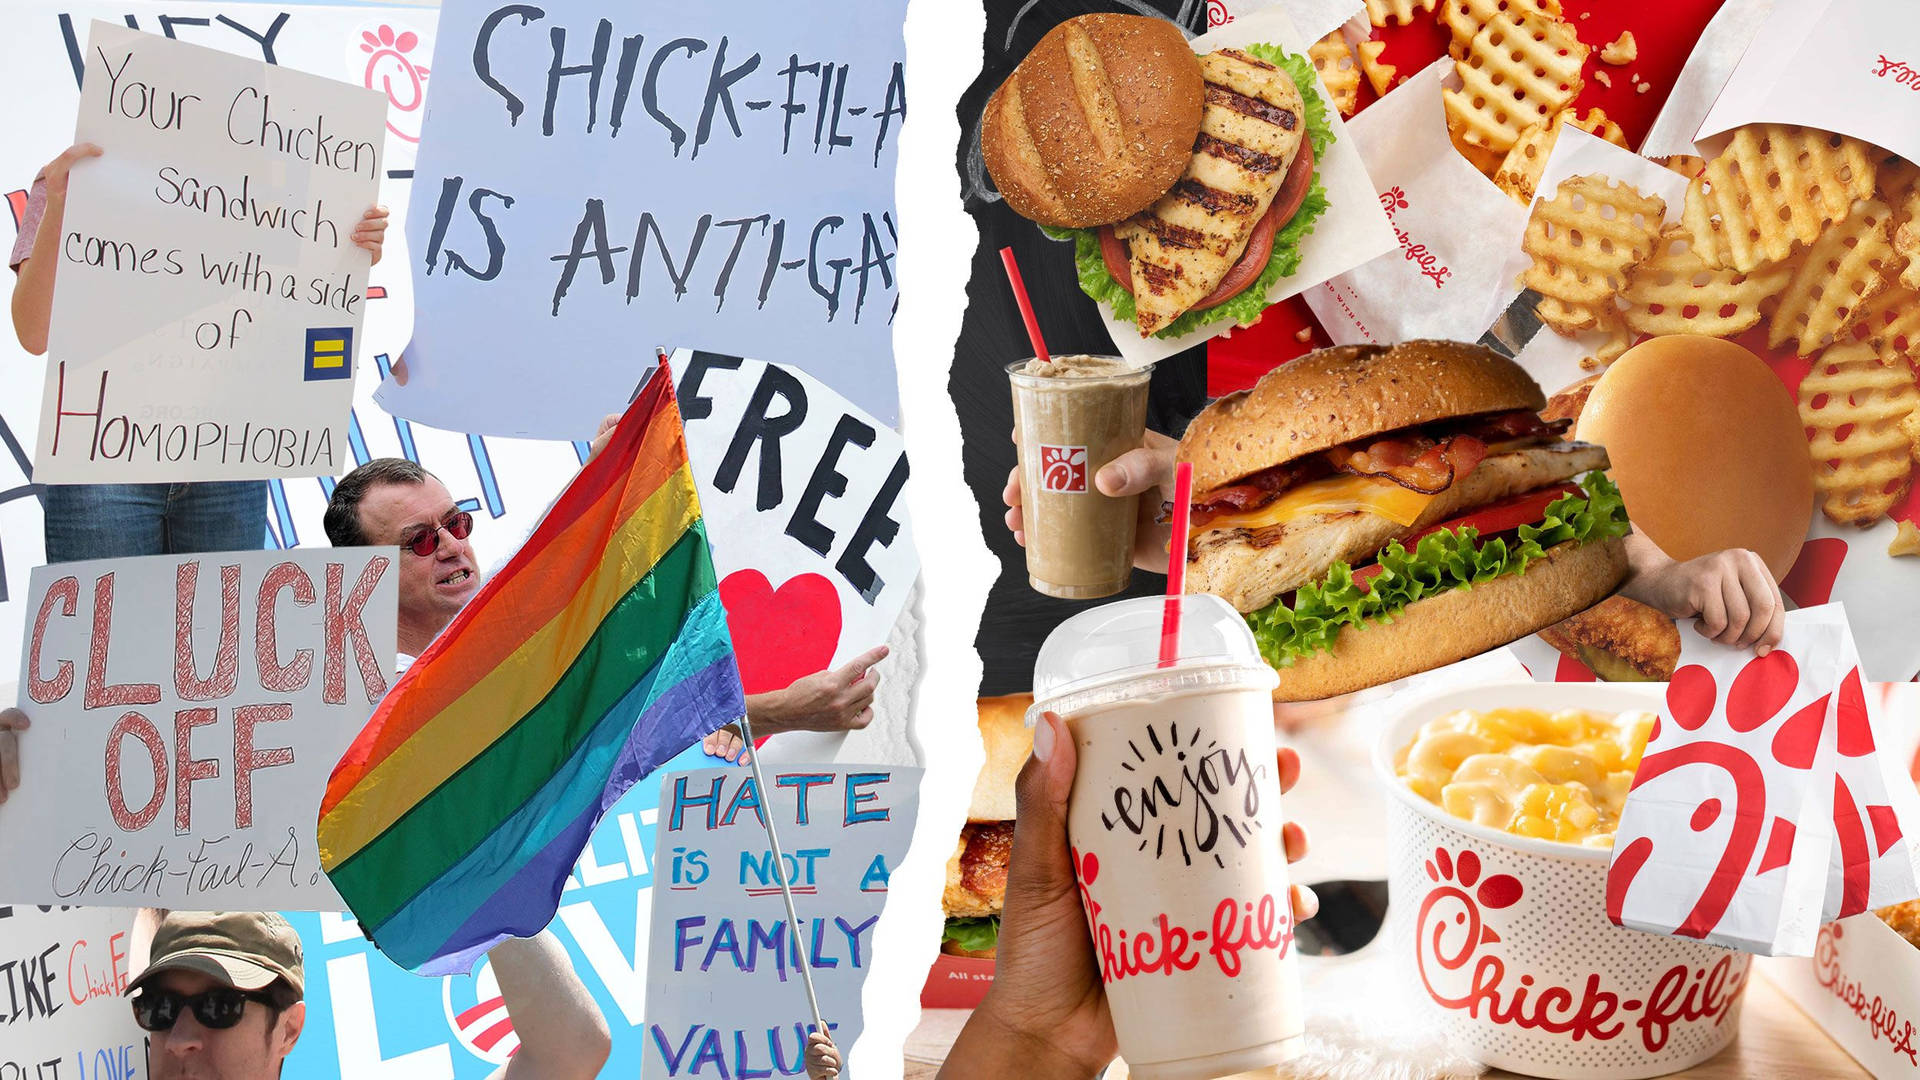 The Never-ending Chick-fil-a Controversy That Sparked Heated Debates.